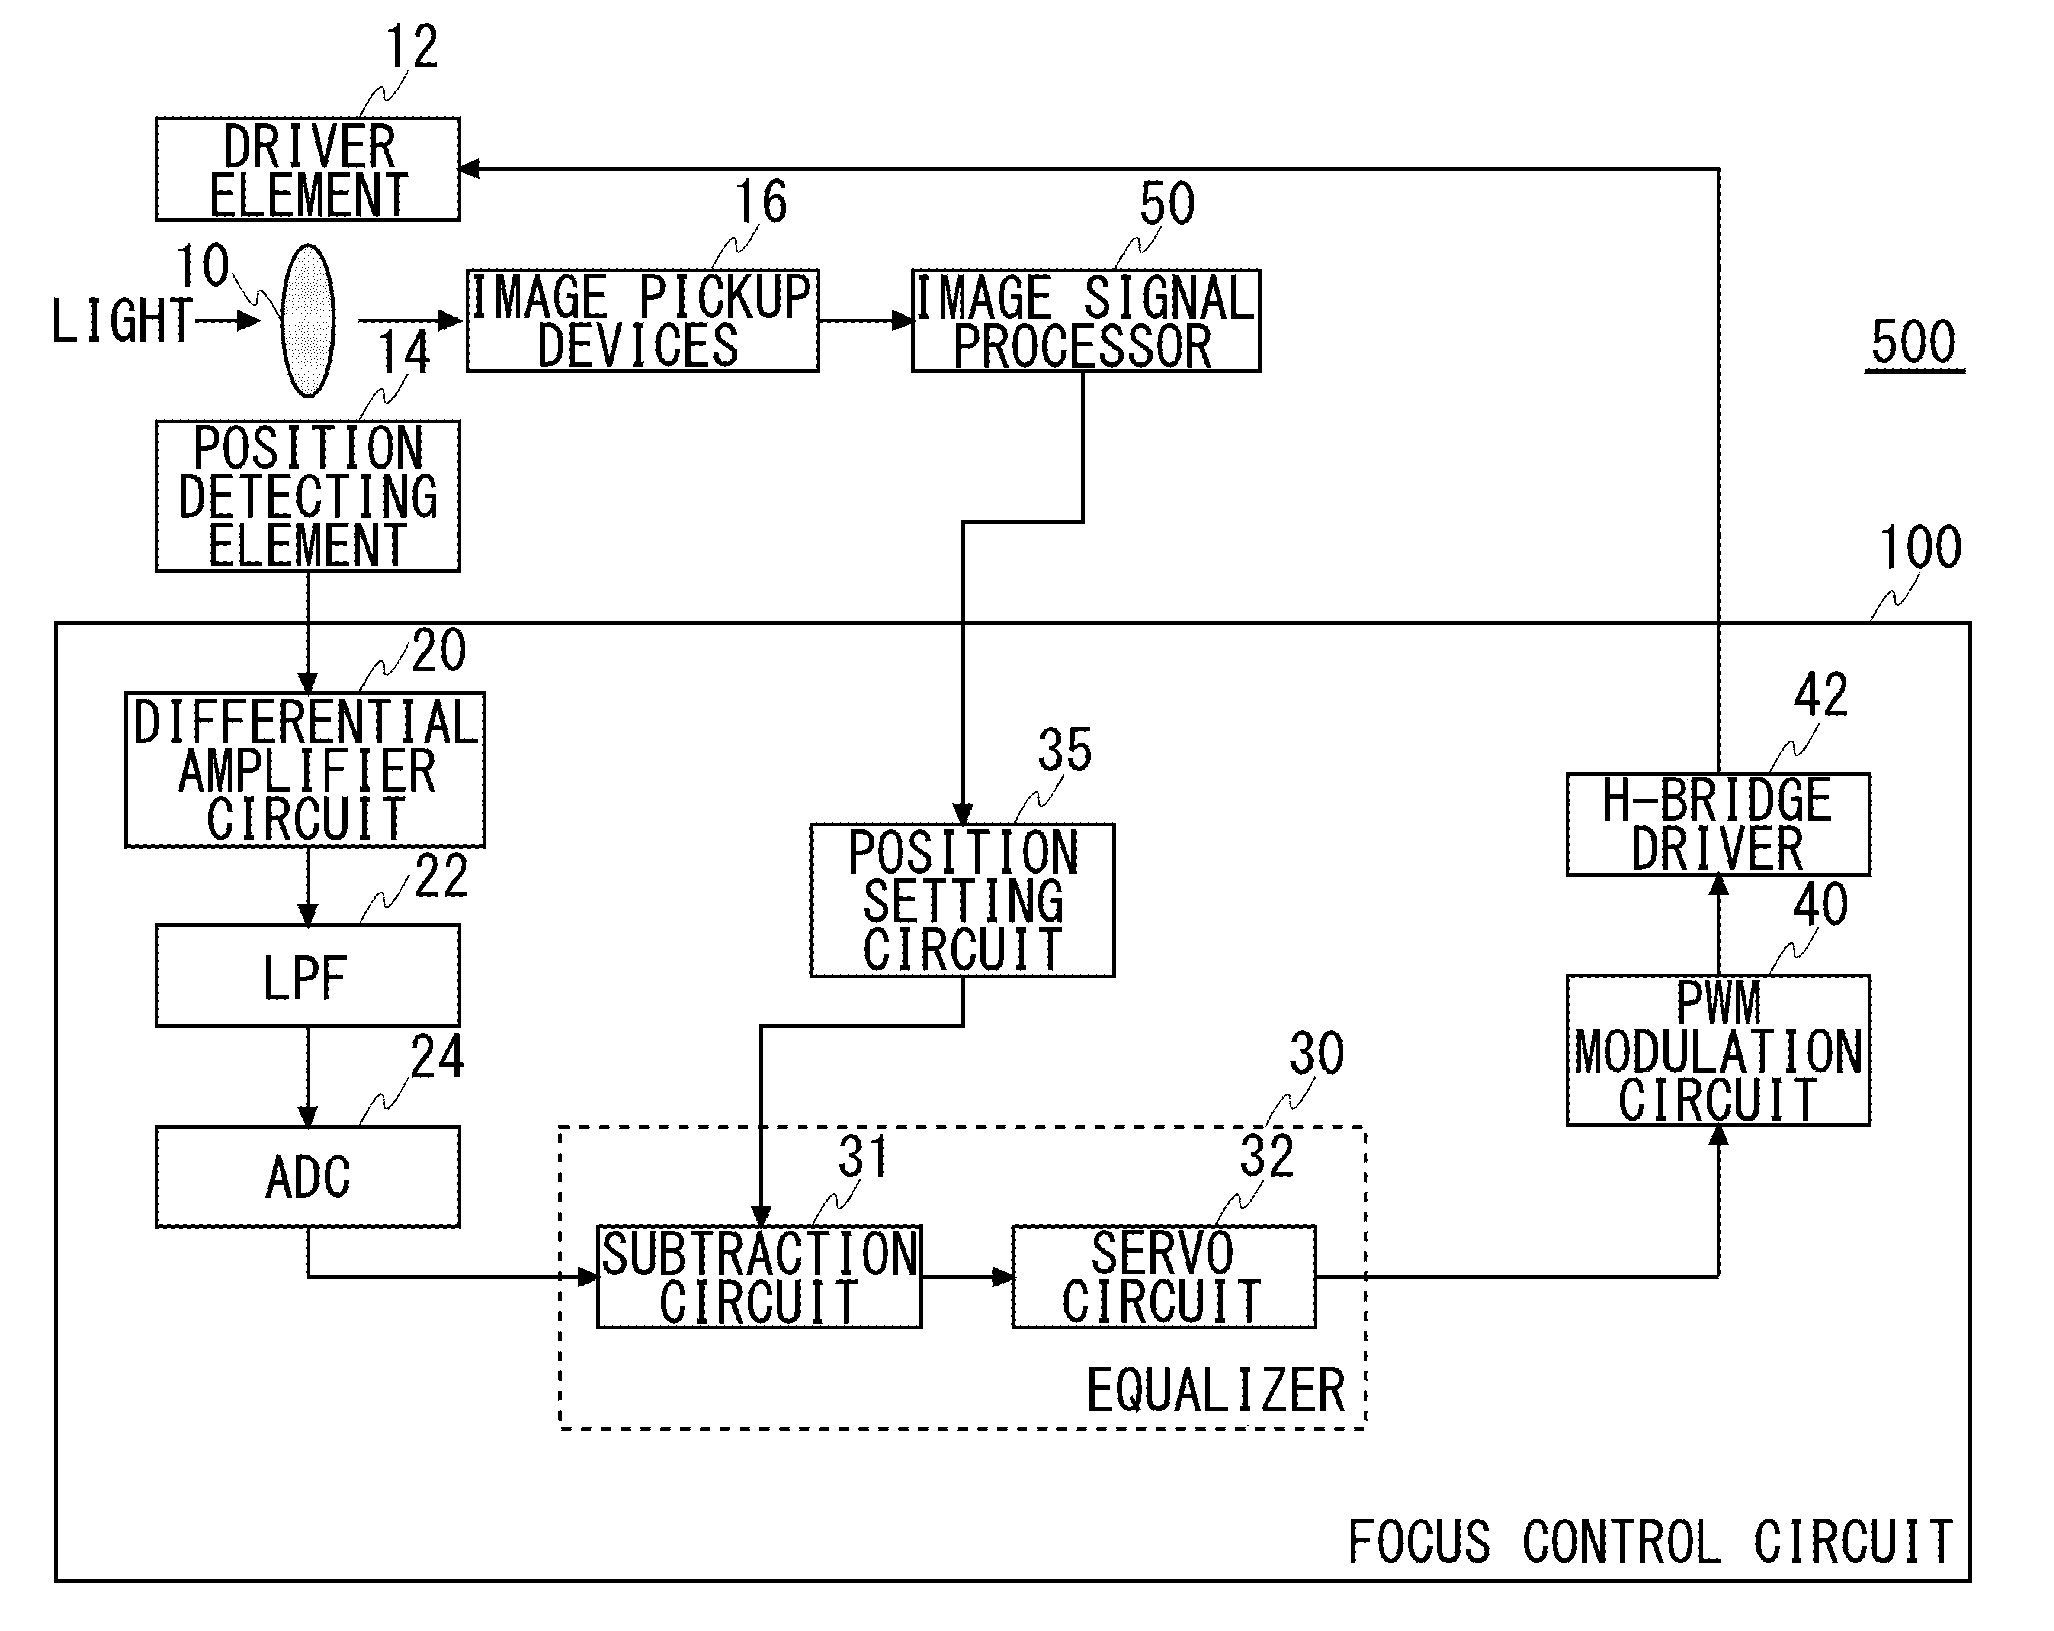 Focus control circuit for adjusting the focus by moving a lens